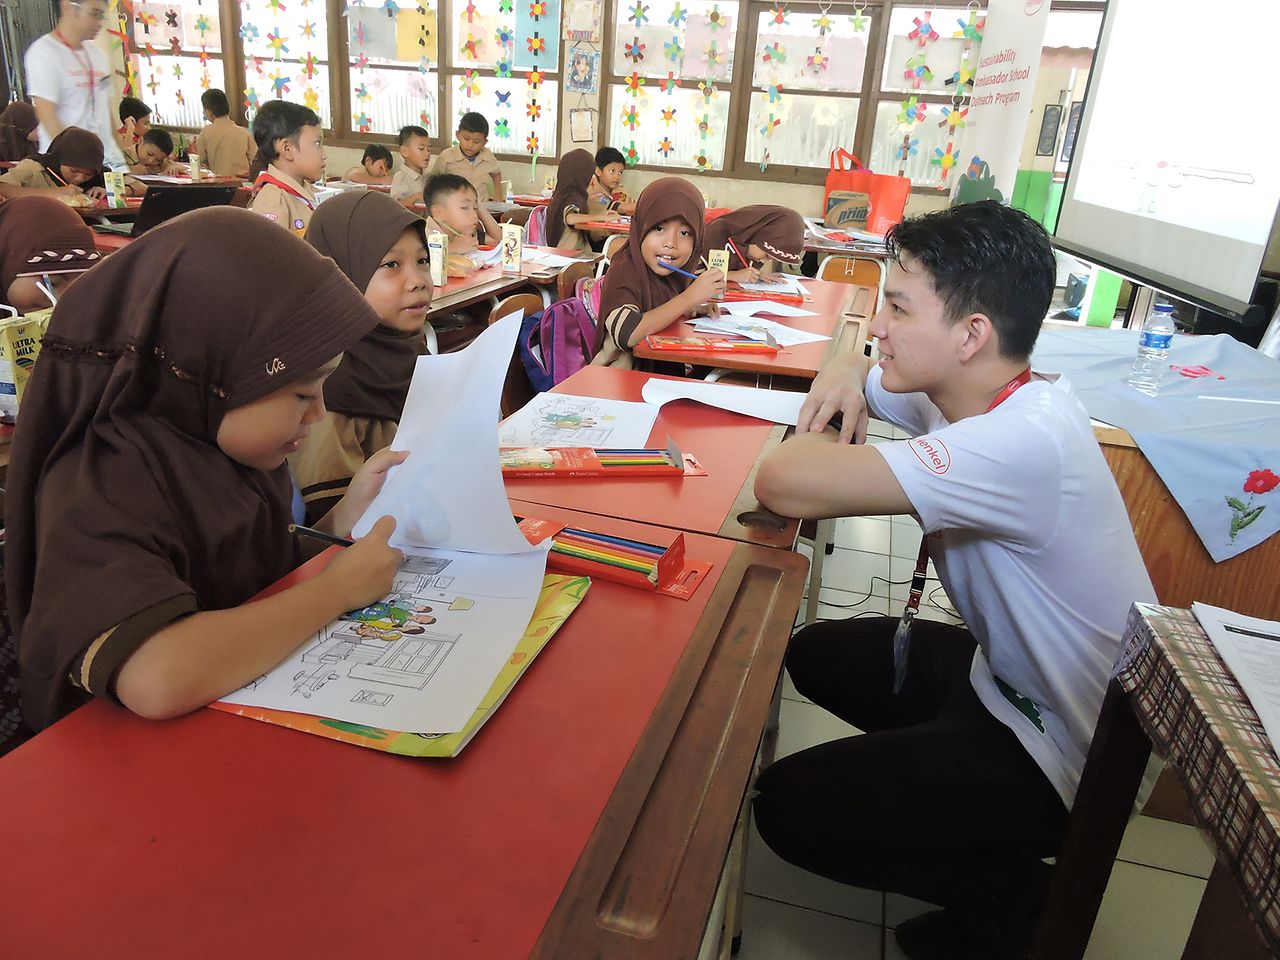 Employees of Henkel Indonesia taught 120 students at two elementary schools in South Tangerang about sustainability in their daily lives.